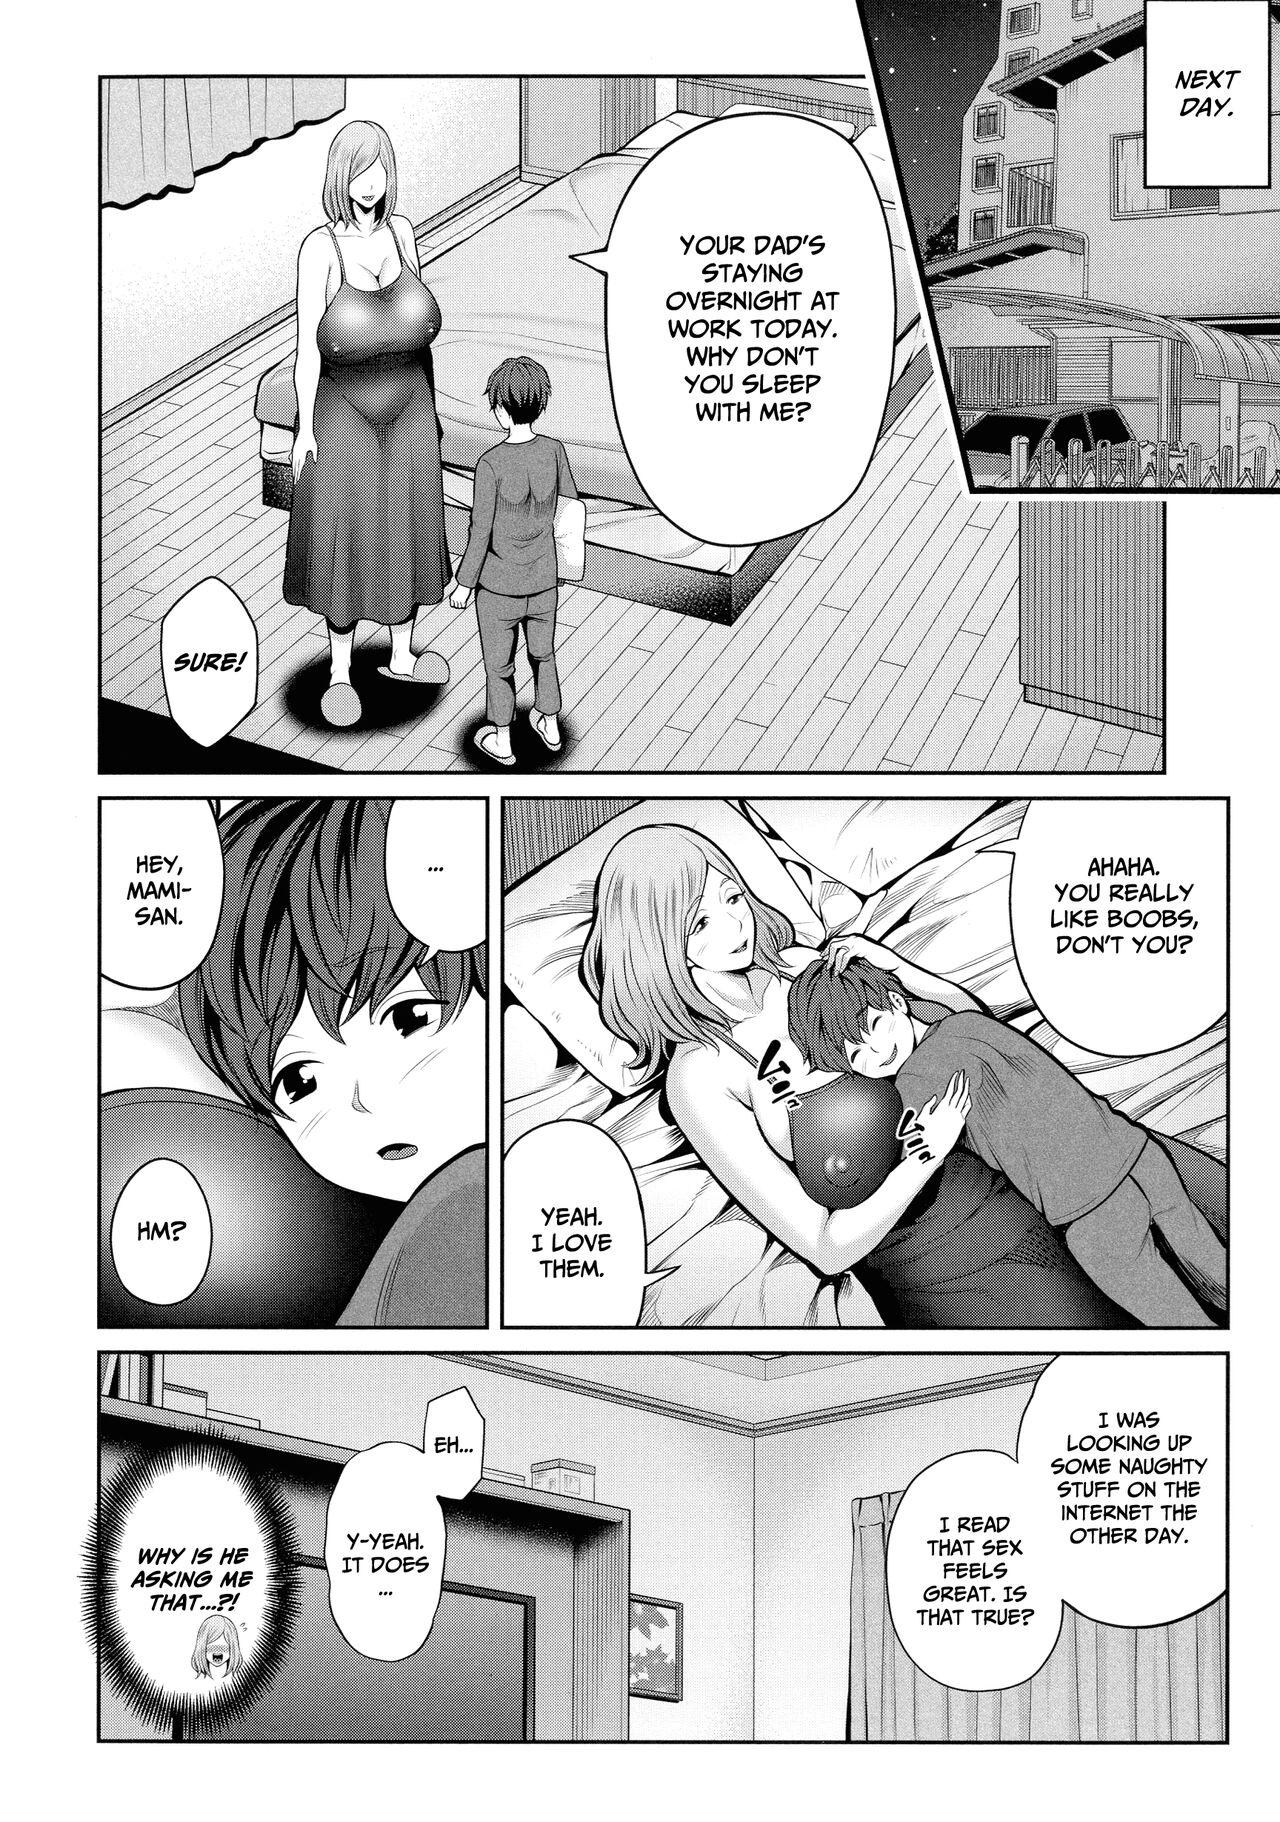 Okaa-san to Issho Chapter 1 | Together With Mom Chapter 1 19